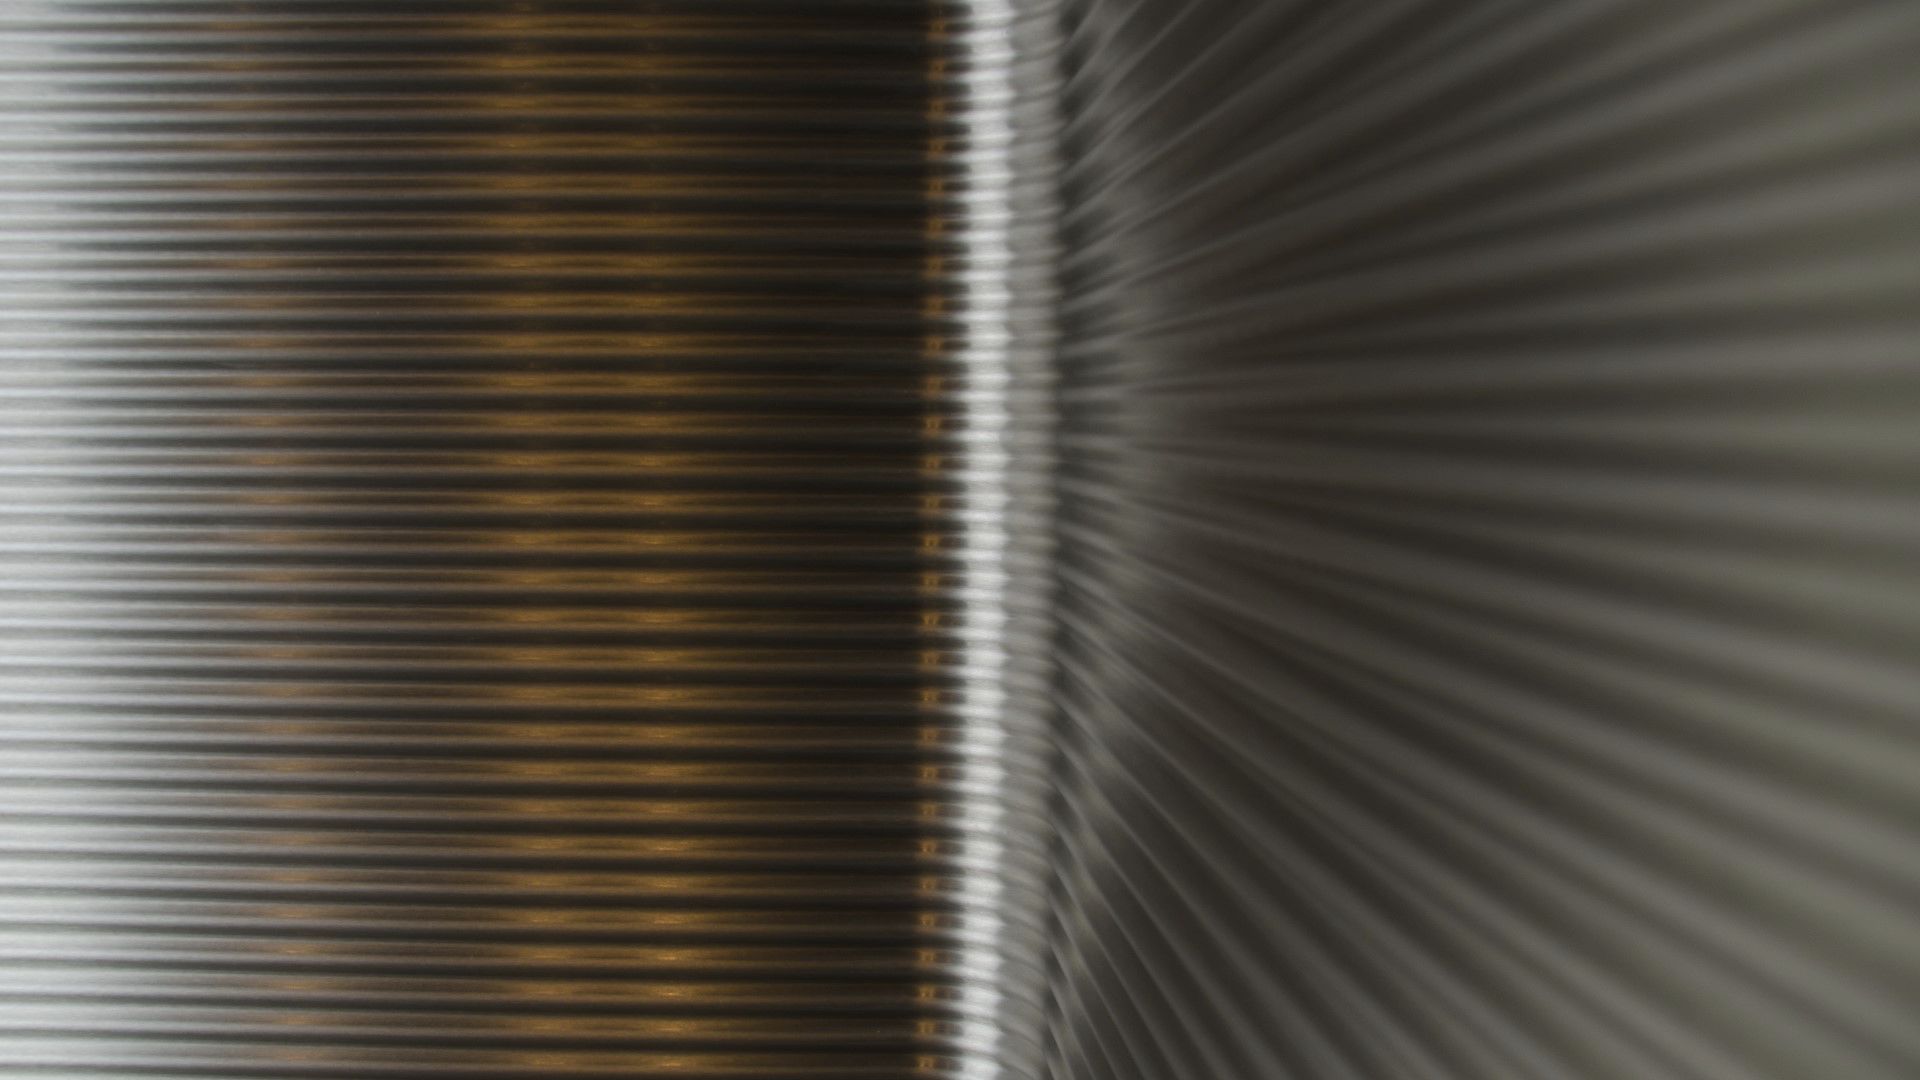 Corrugated Metal Sheet Stainless Steel For Interior